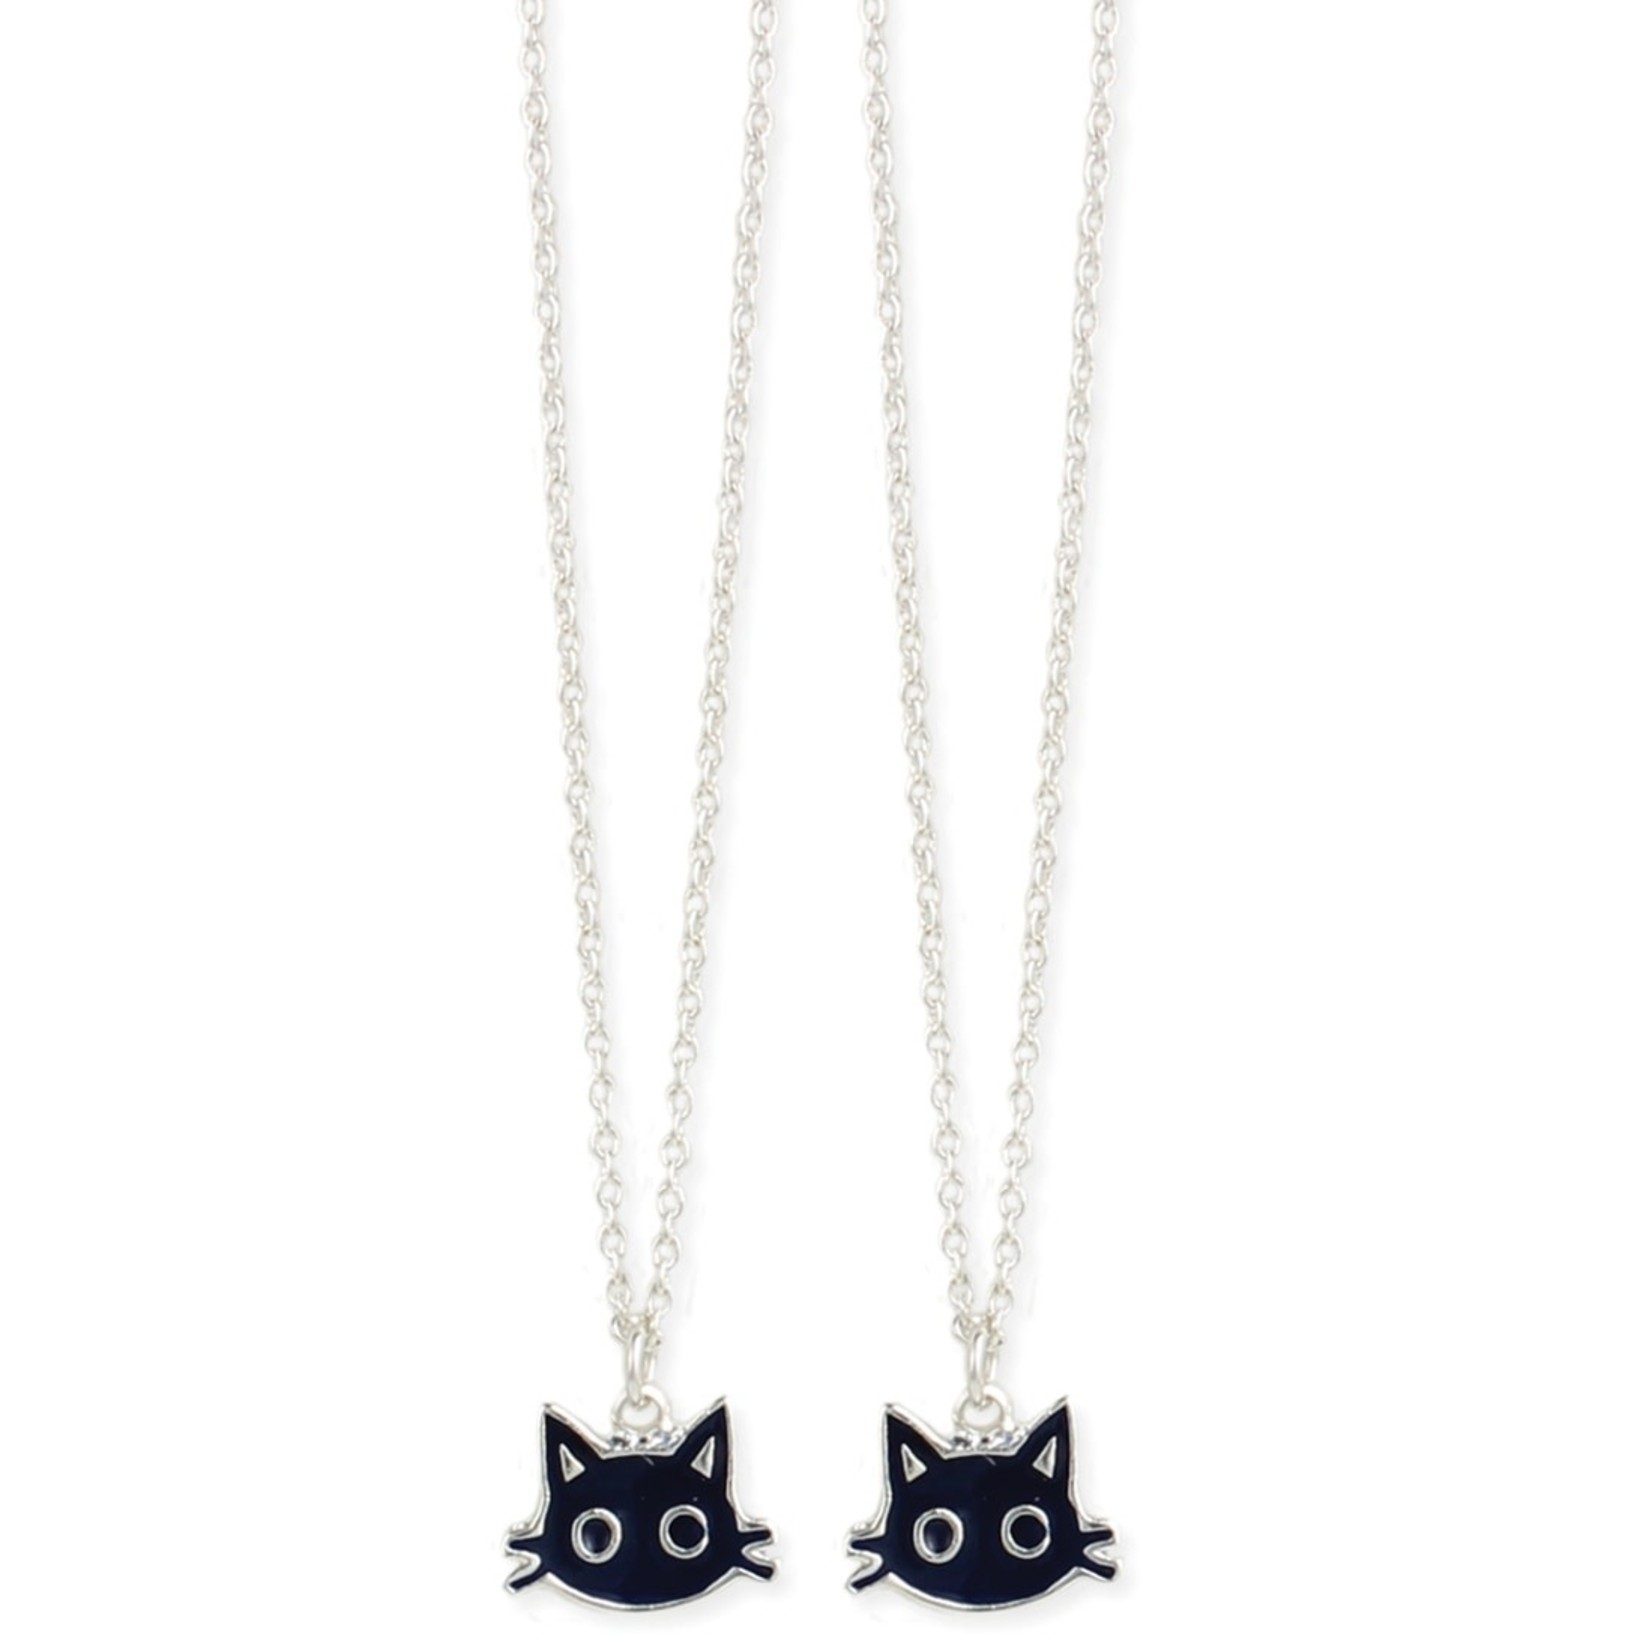 Necklace - Cats - Matching Necklace Set